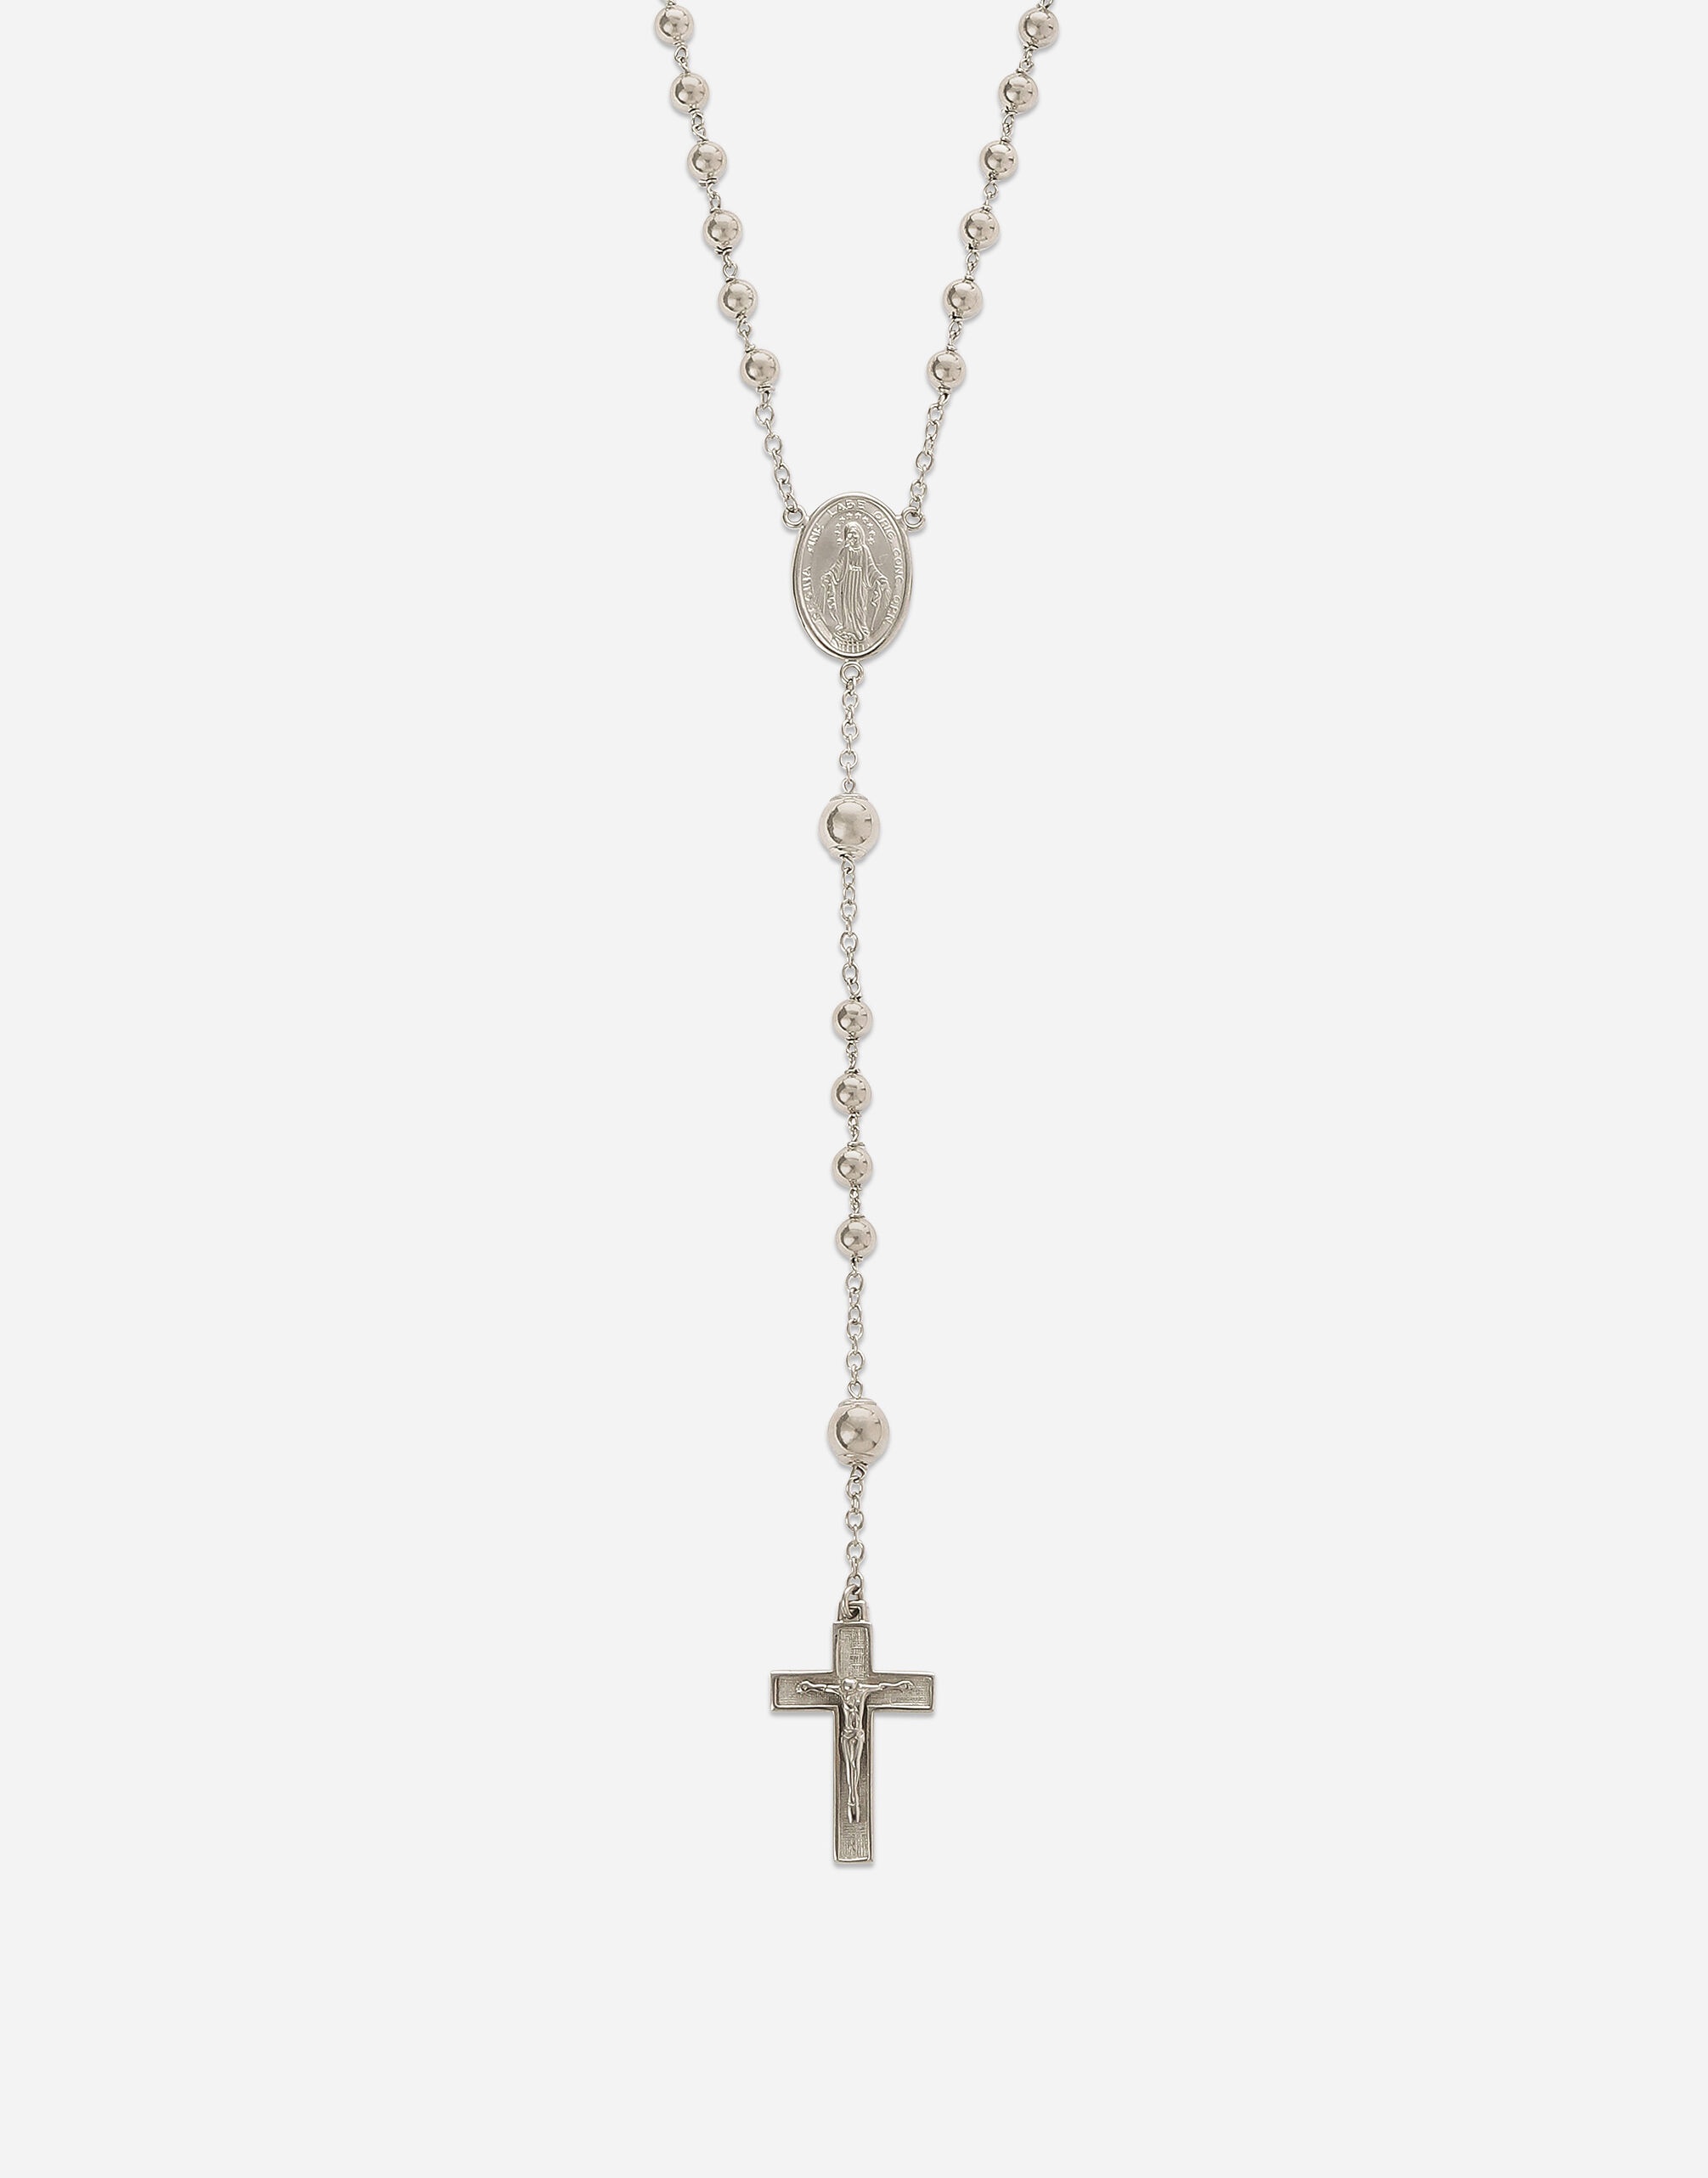 Tradition white gold rosary necklace - 2